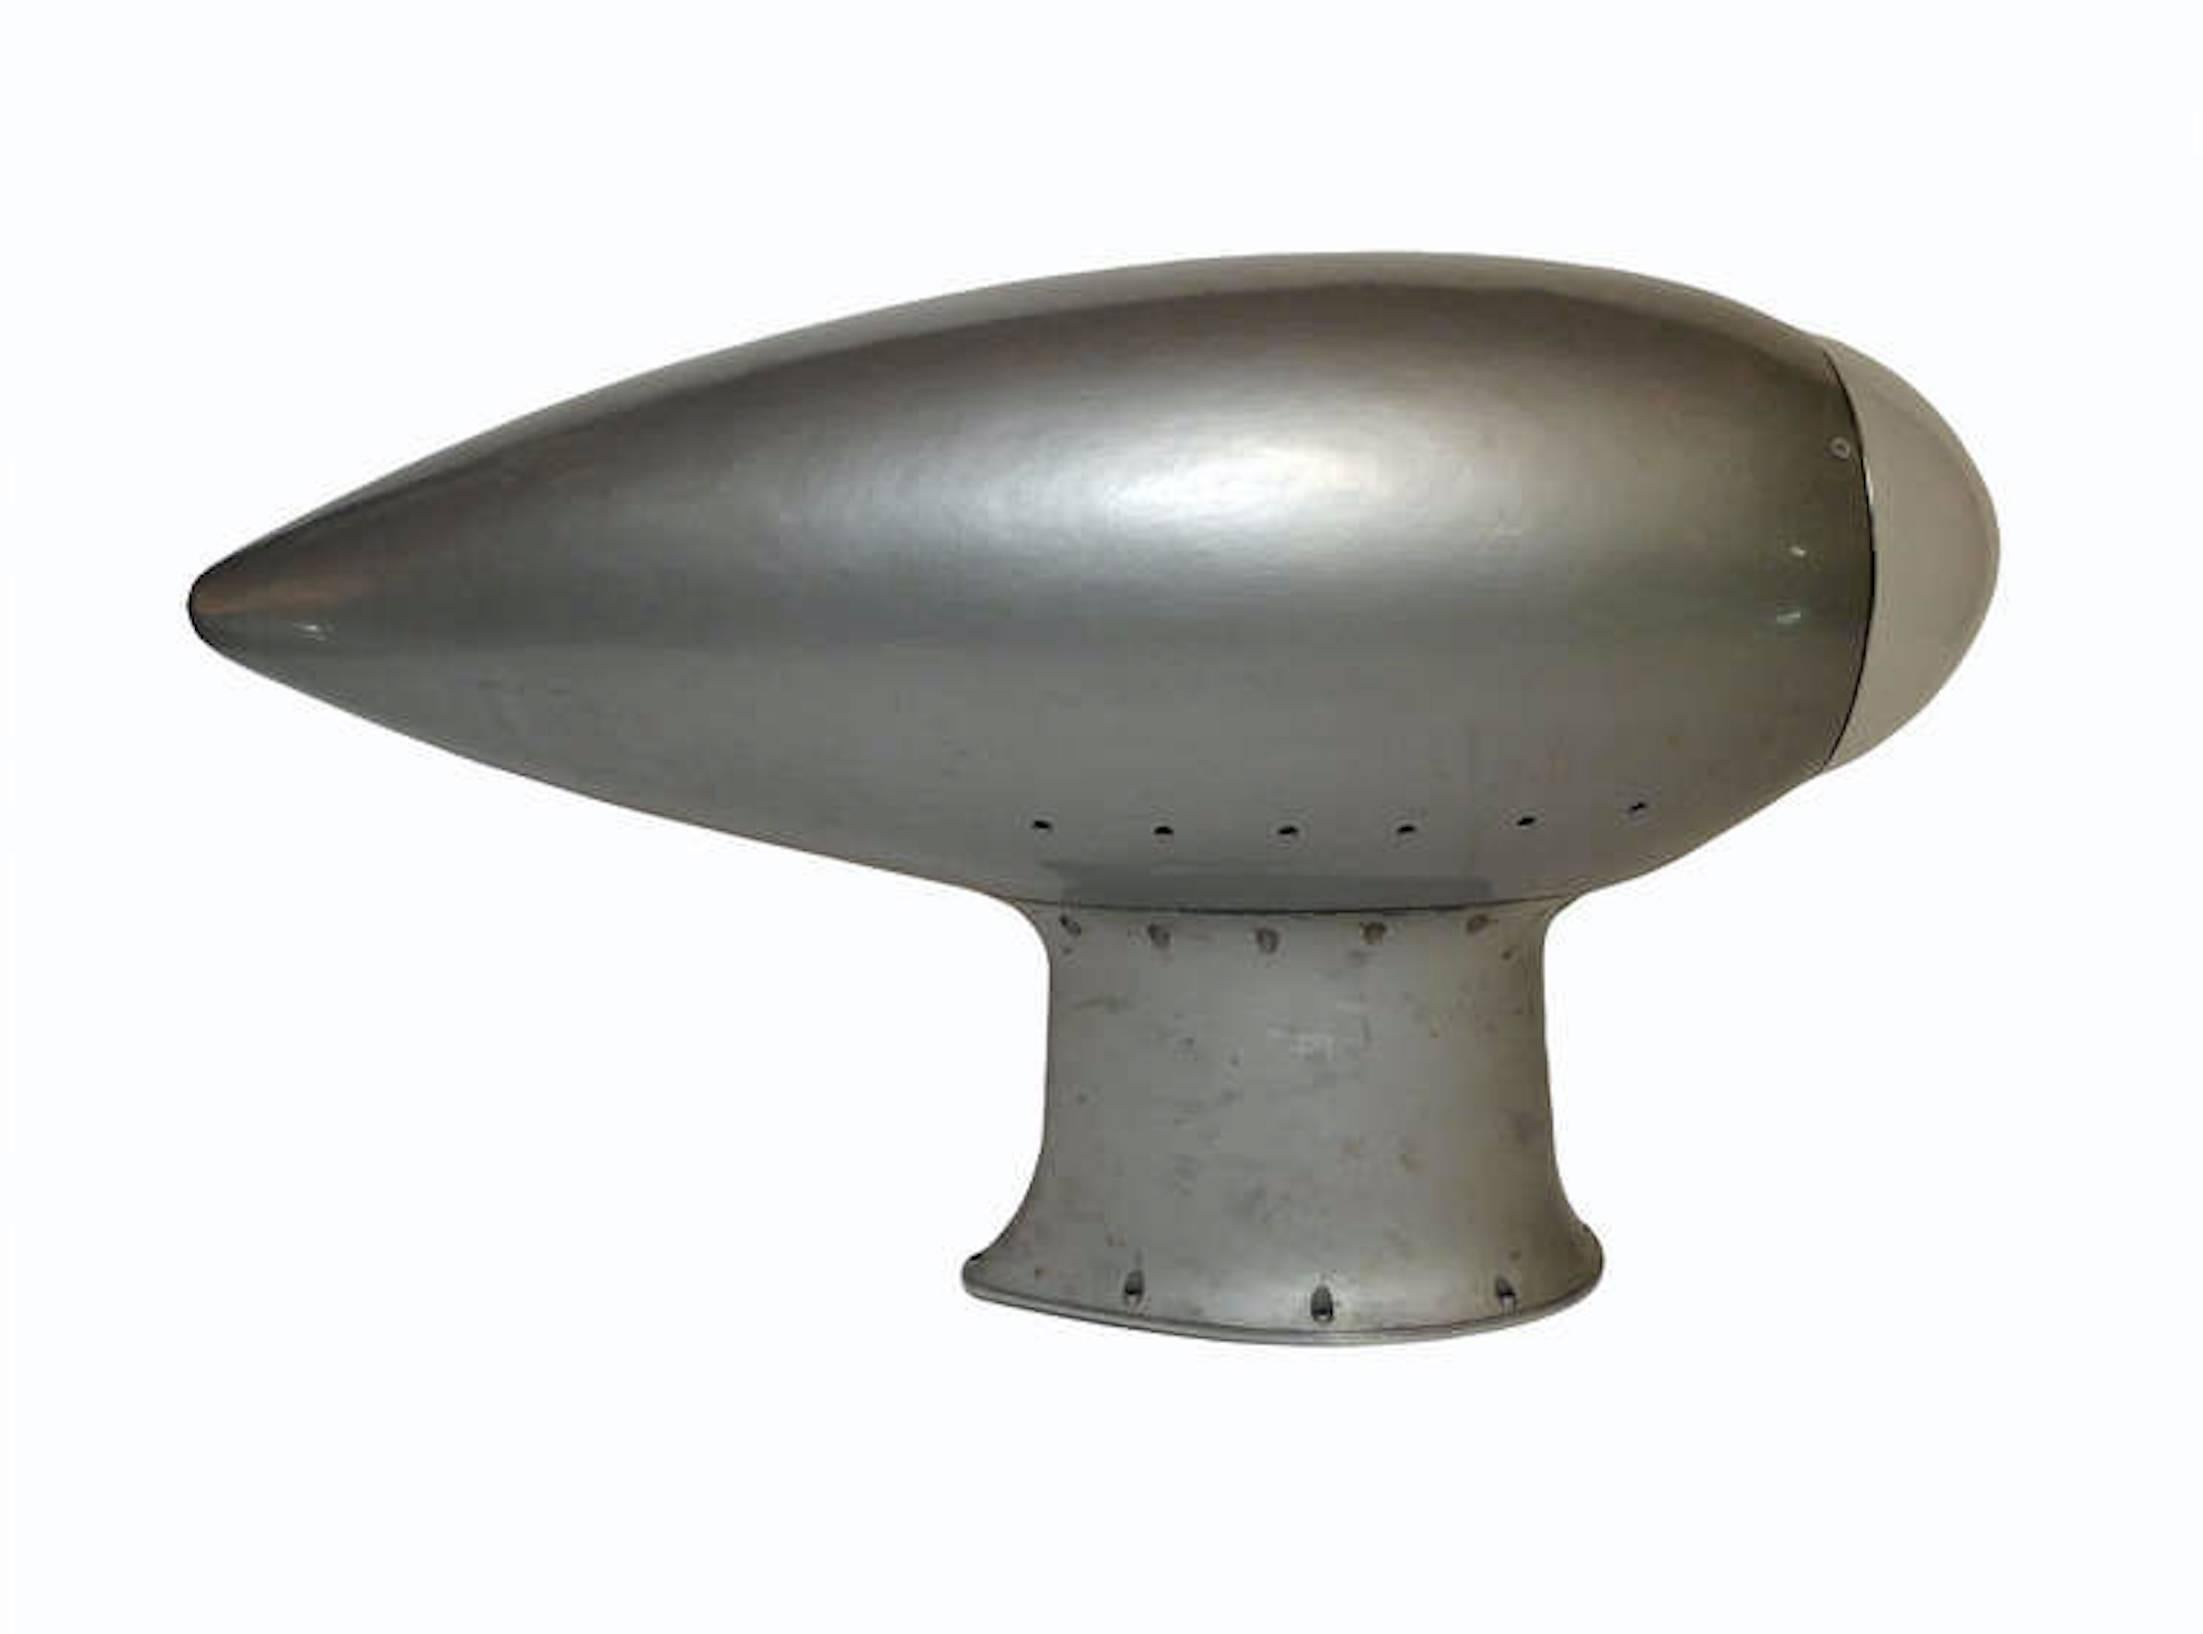 A fine example of reinterpretation and realization from an old element. One radar cover from an American airplane have been reused as a sconce . The structure is made out of painted wood , gray color, with the top element made out of curve frosted